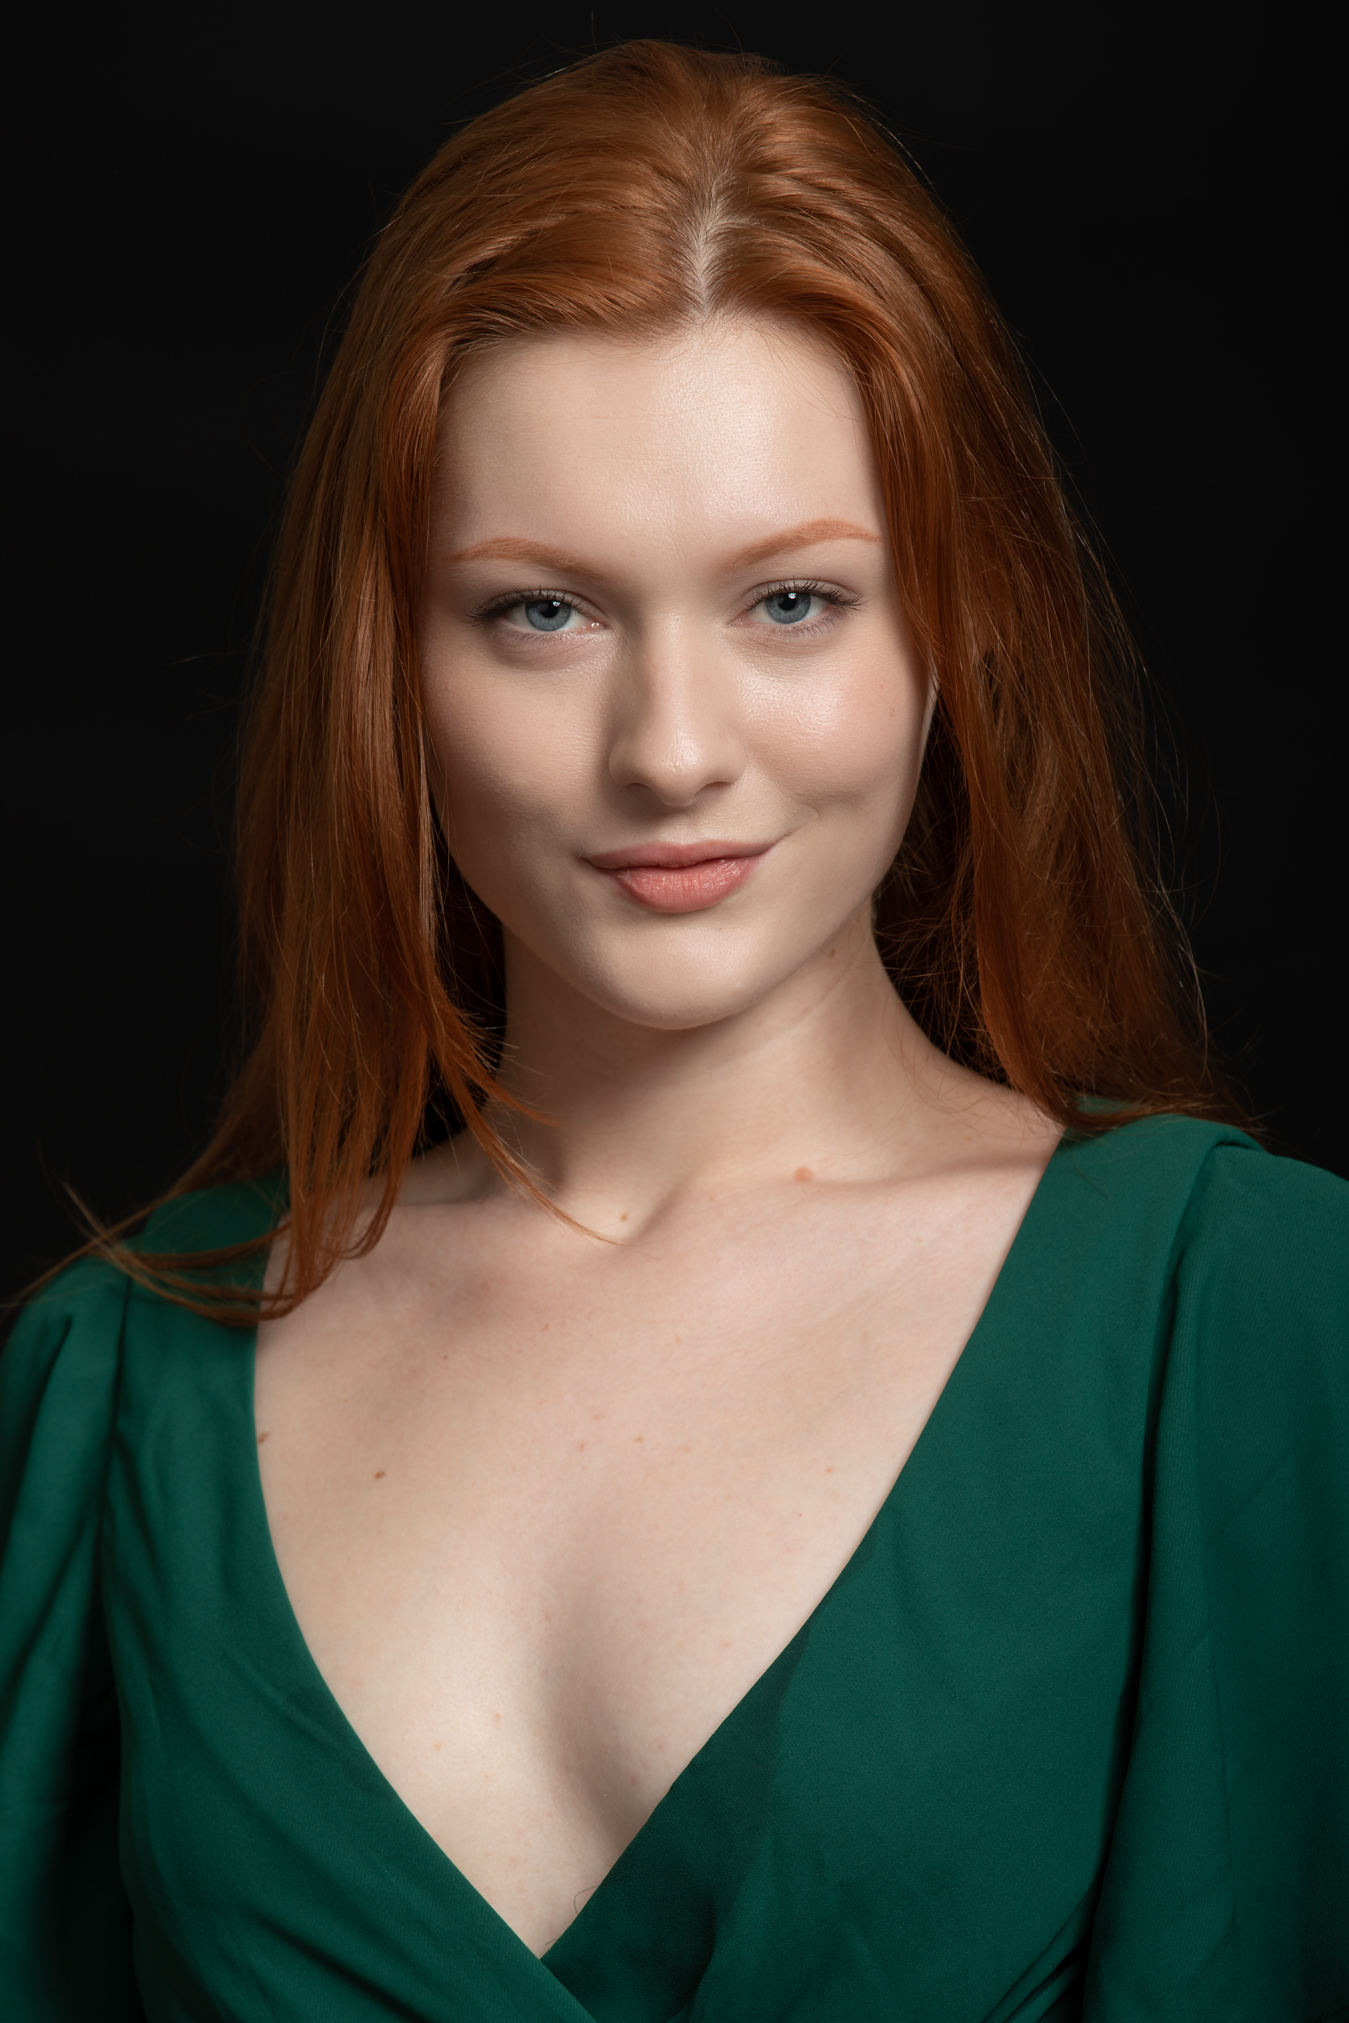 Theatrical Model Actress Headshot Photography